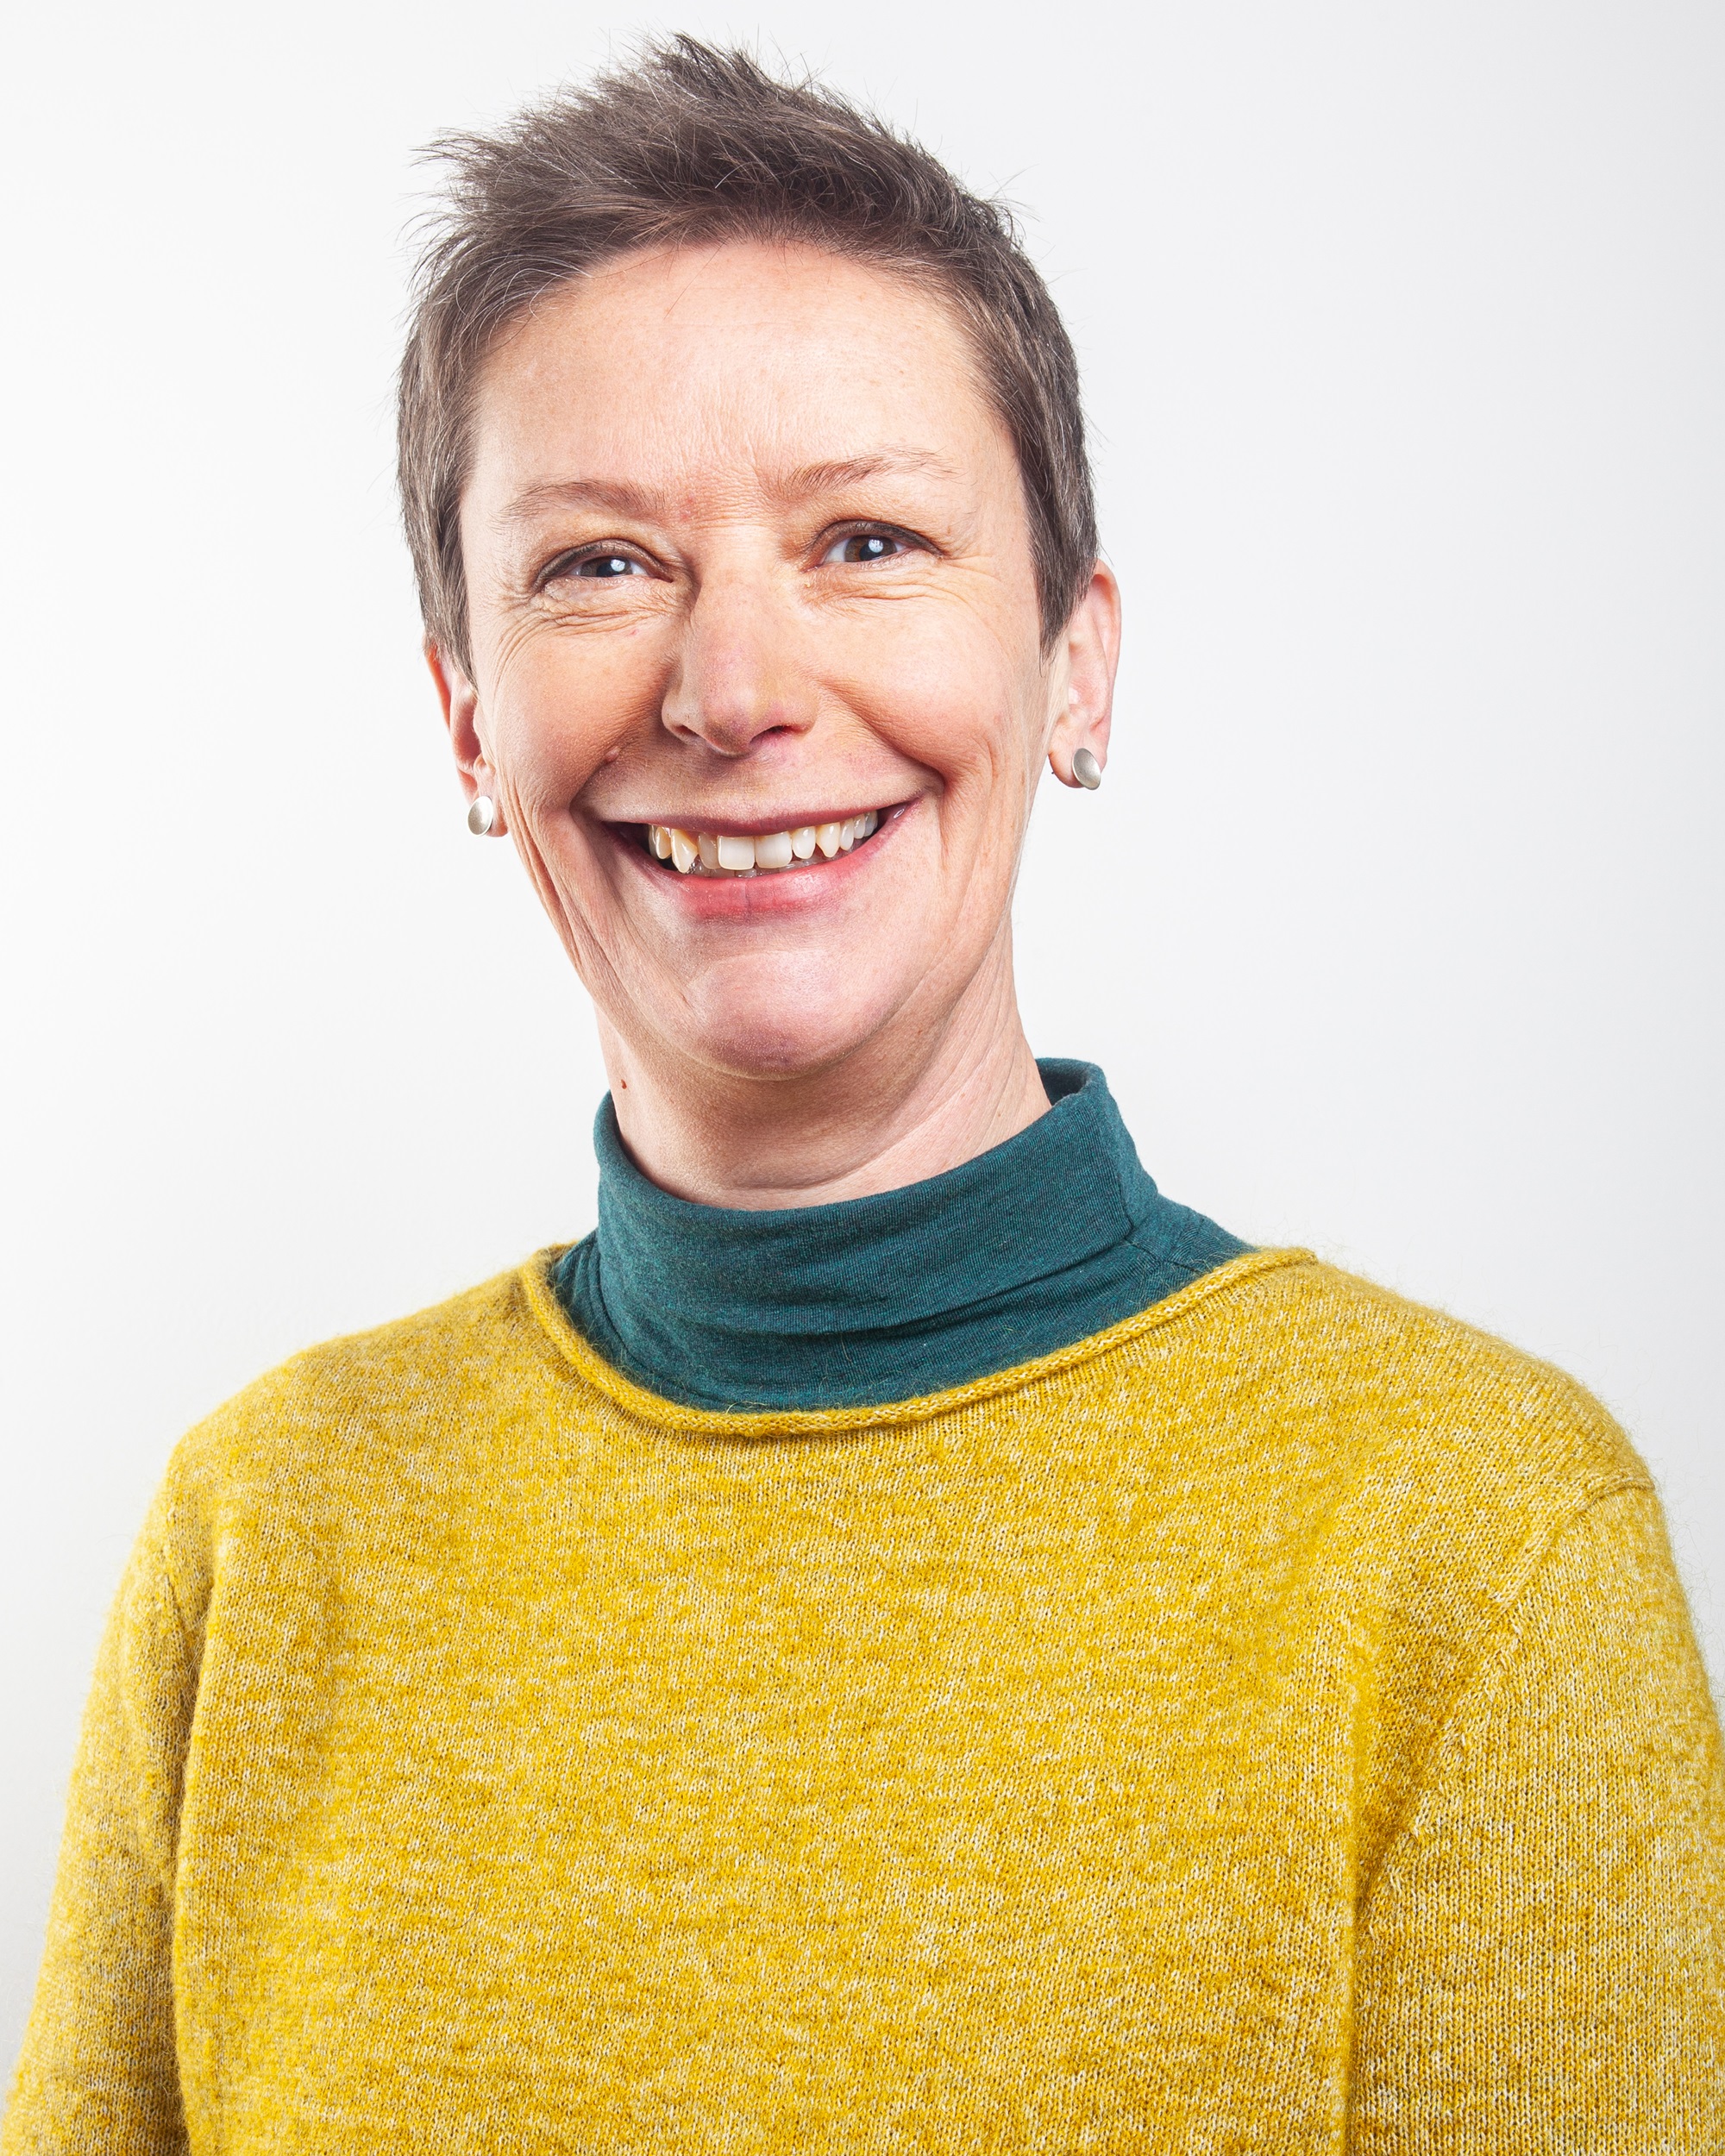 Michelle has short hair, a yellow jumper and a kind smile